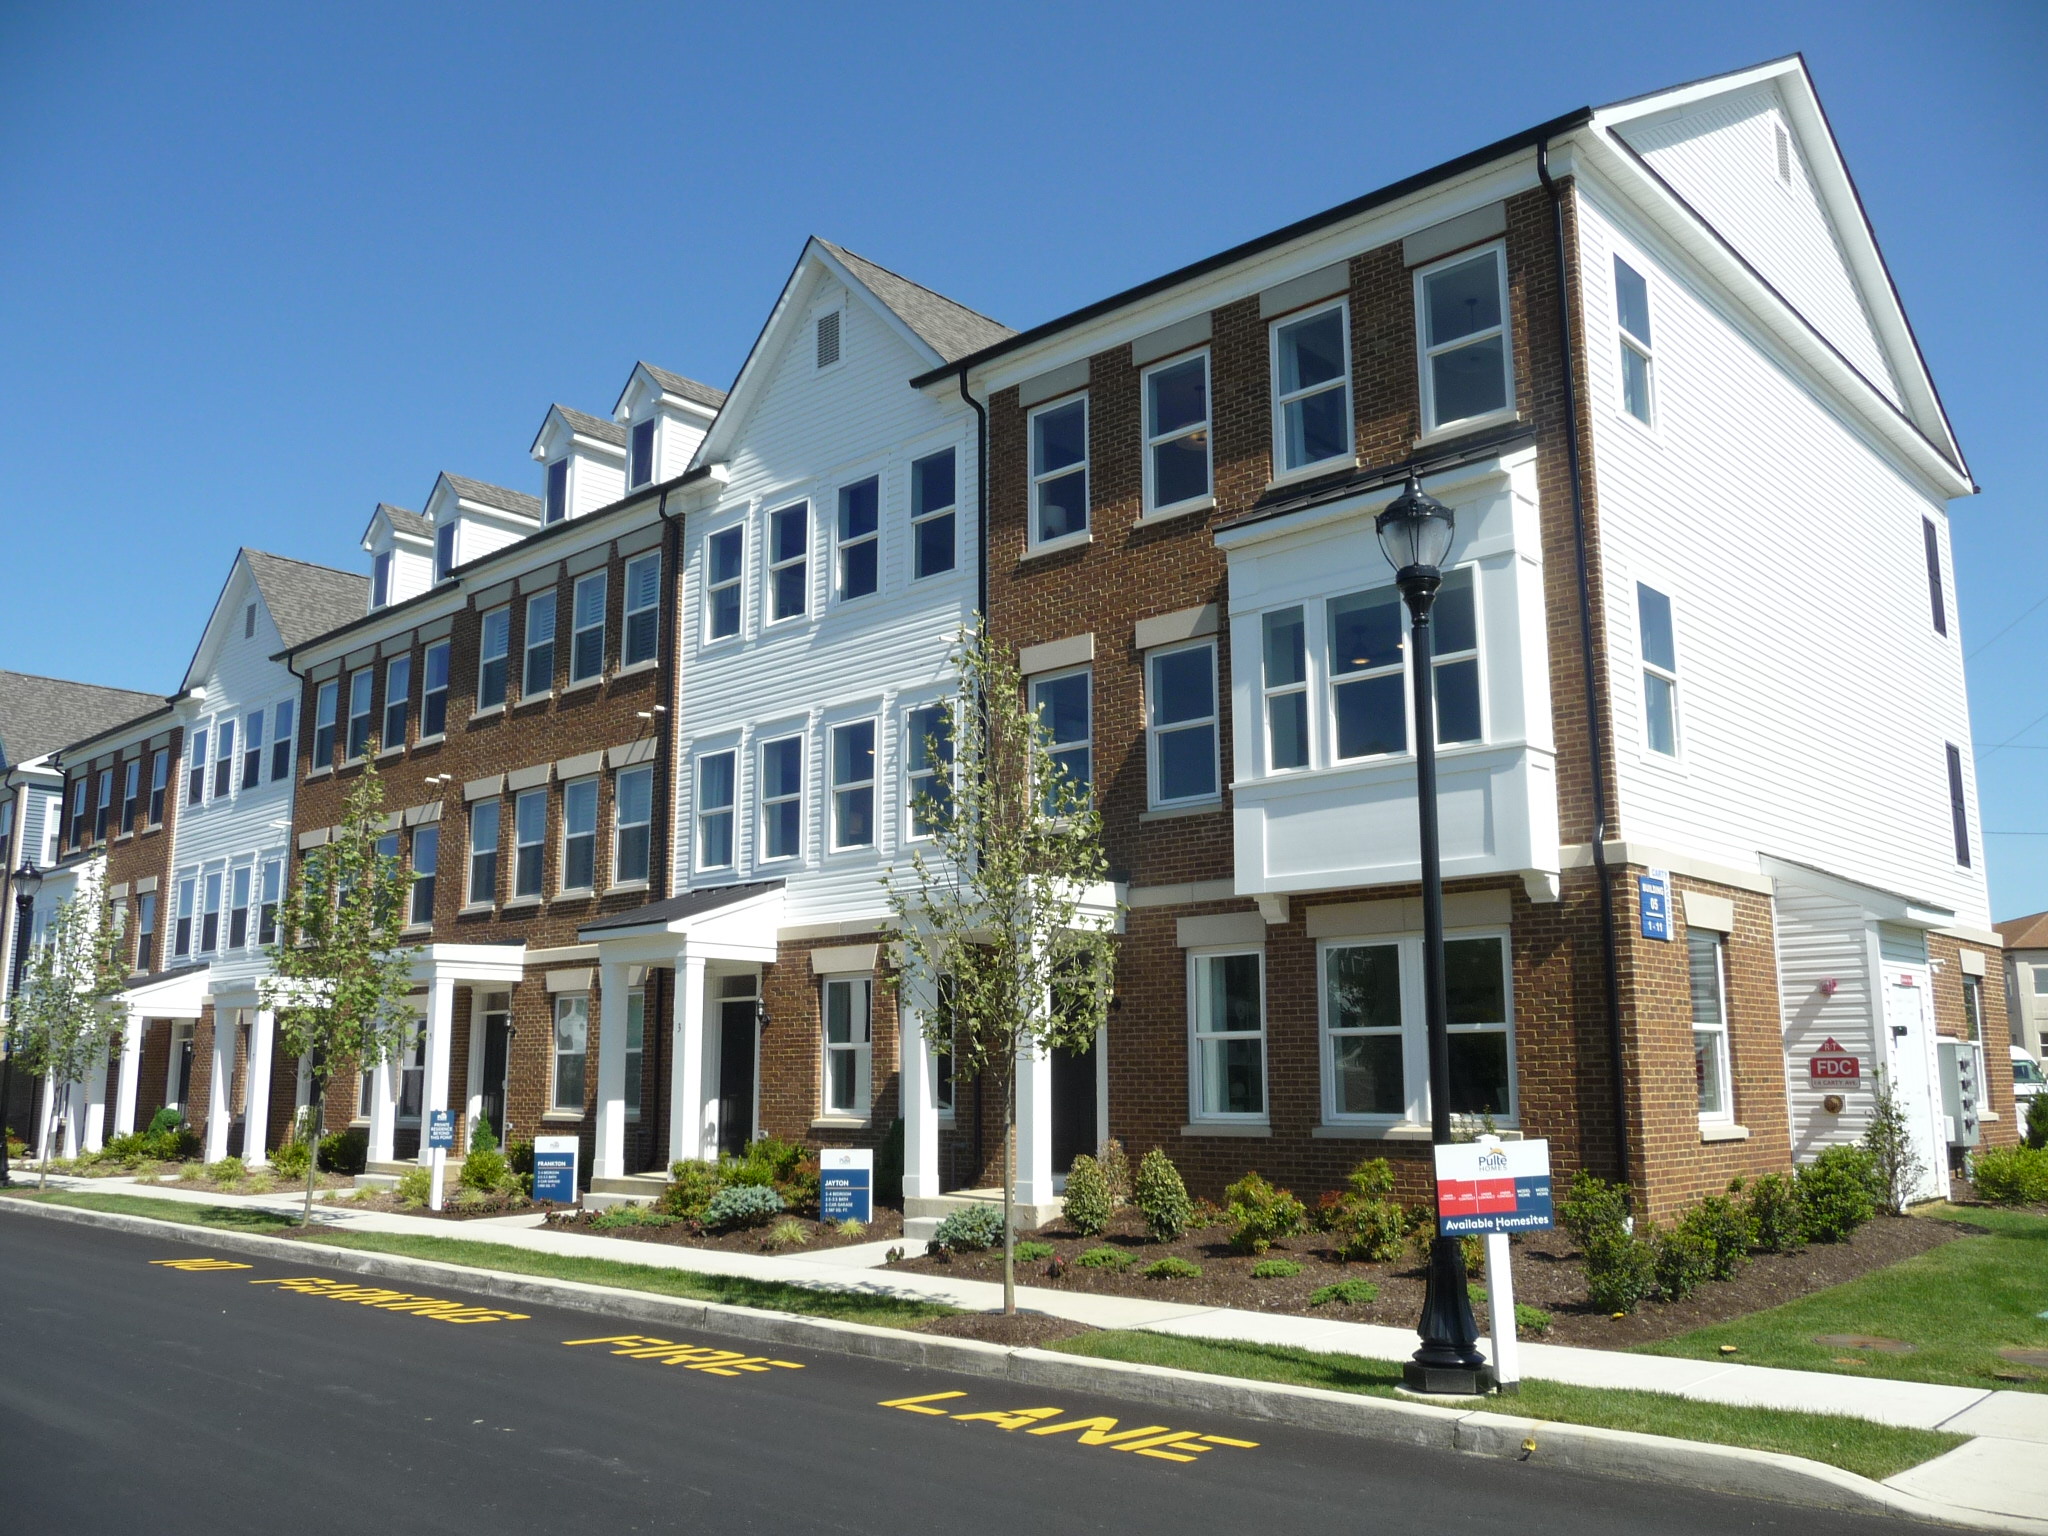 A picture of one of the buildings which houses the models at Parkers Creek in Oceanport, NJ.